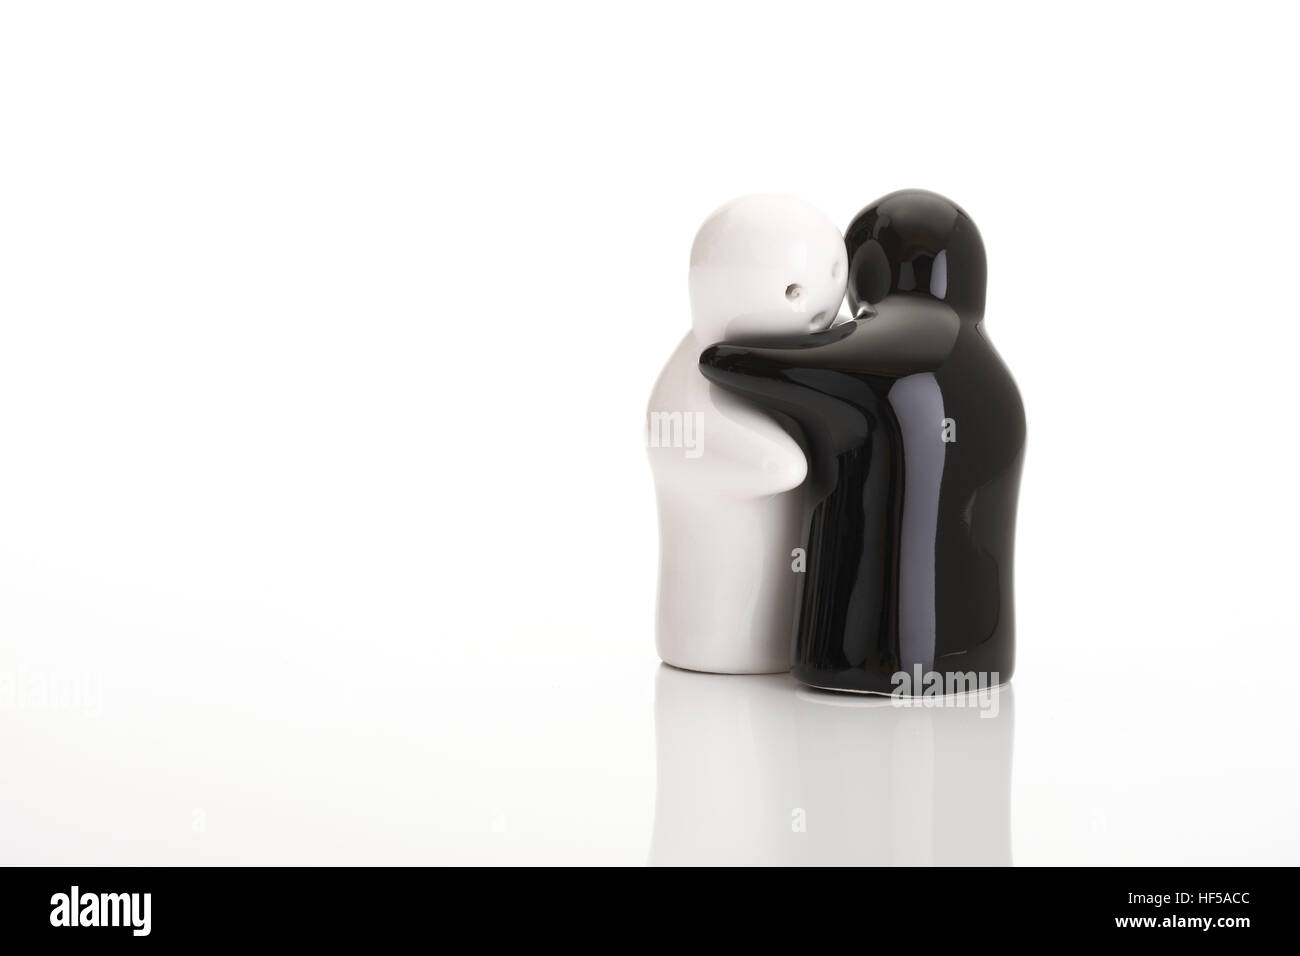 The hug - symbolic picture - ghost salt and pepper shakers Stock Photo